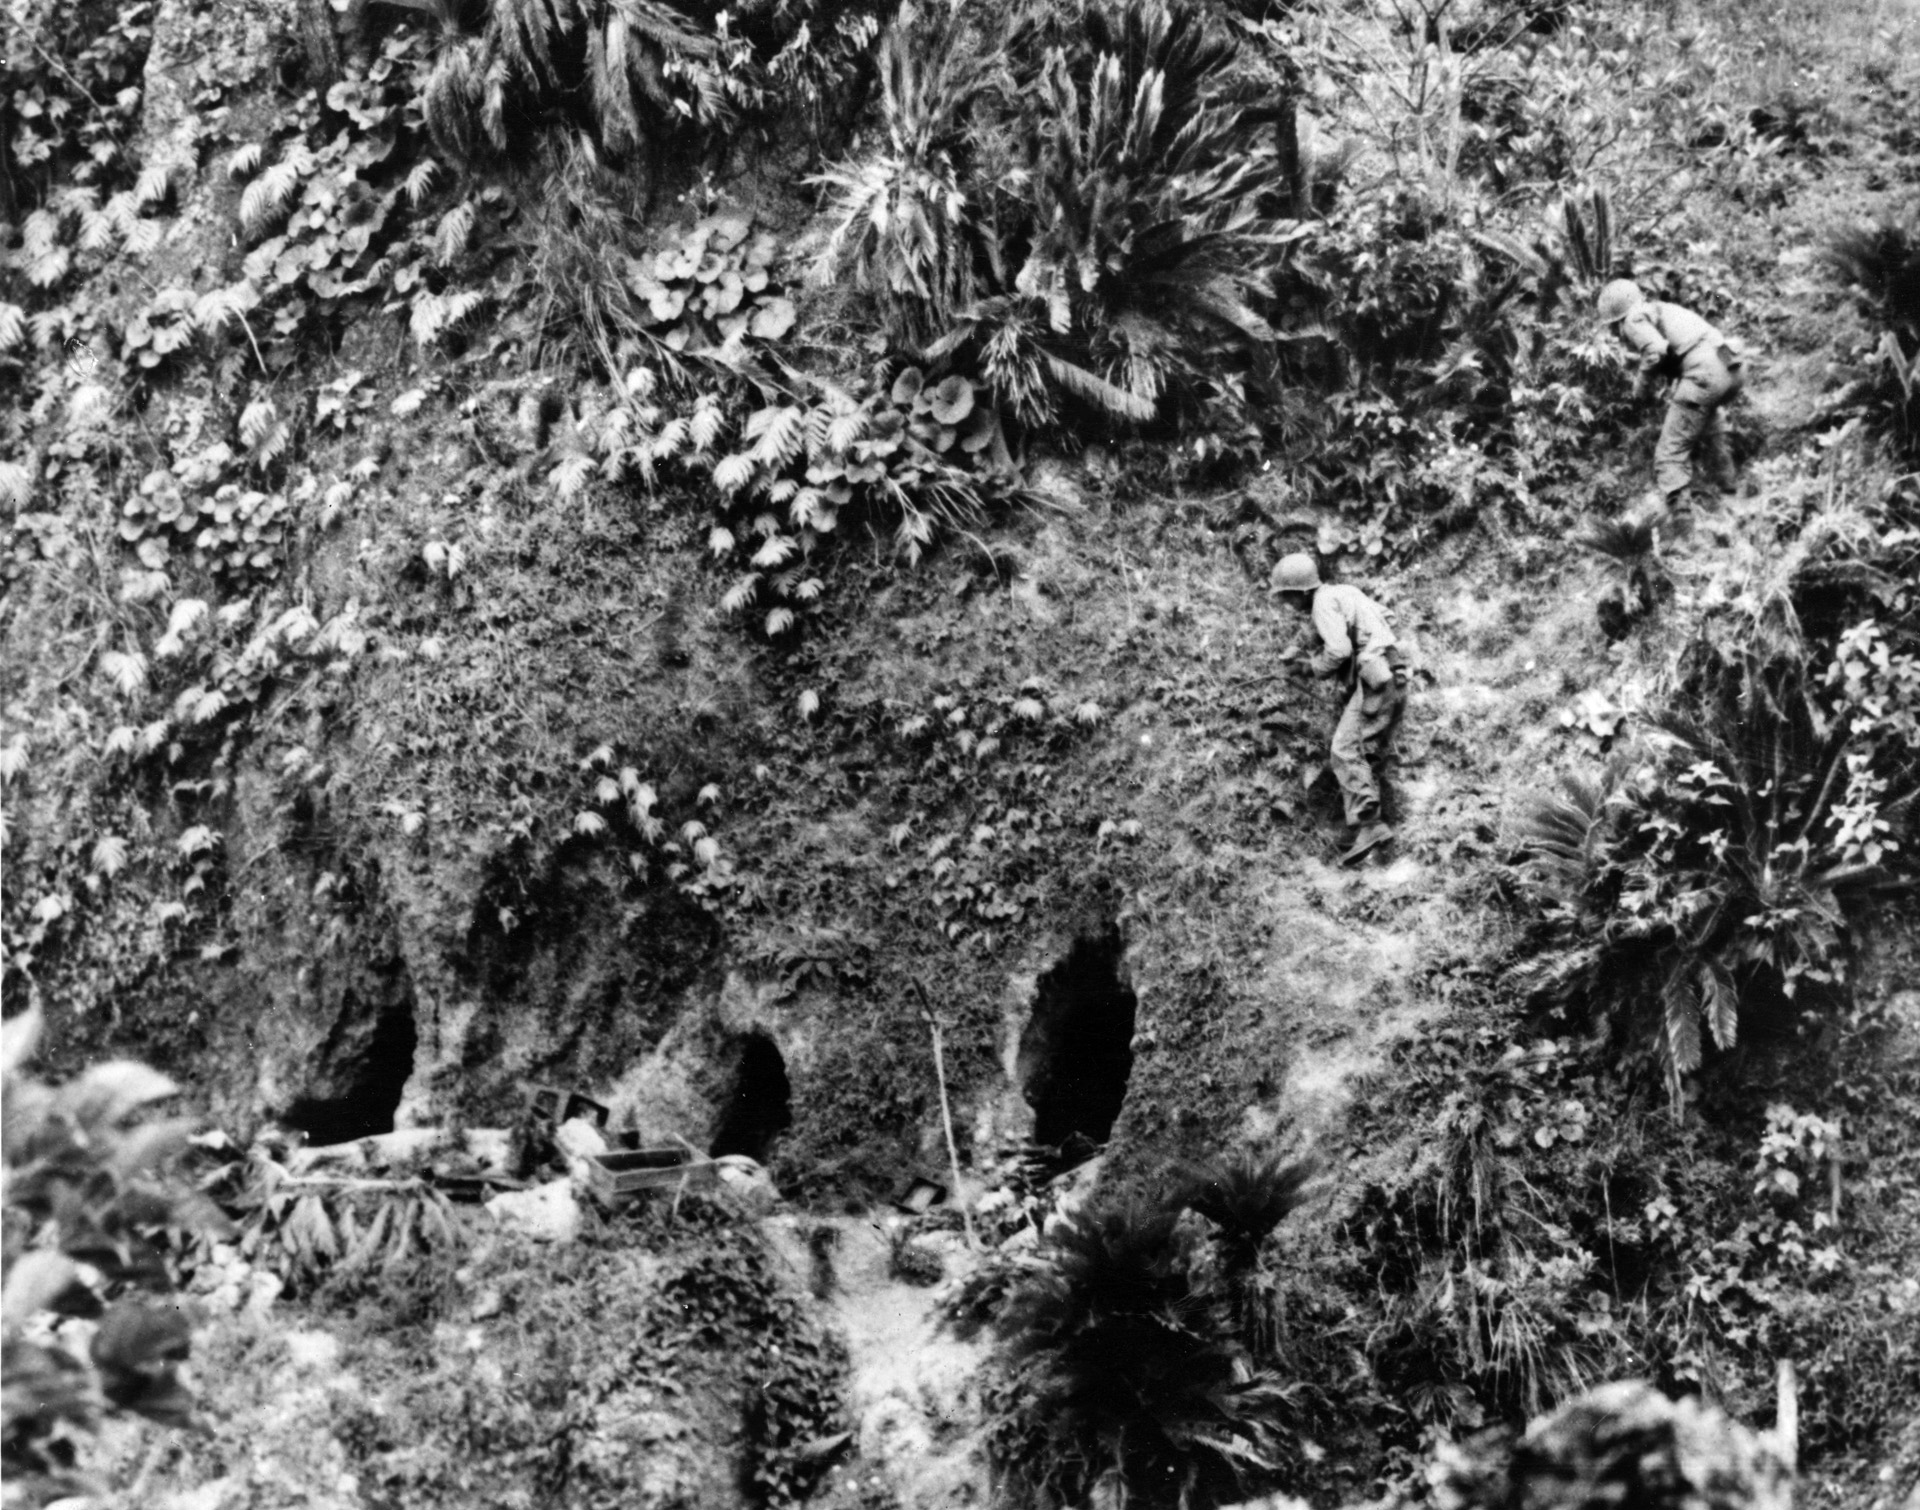 Armed with explosives, two American soldiers approach the entrance to a cave believed to hold enemy troops. Okinawa’s labyrinth of fortified caves, bunkers and machine-gun nests with interlocking fields of fire at times caused the Japanese defenders to be incinerated, blown up, or buried alive. 